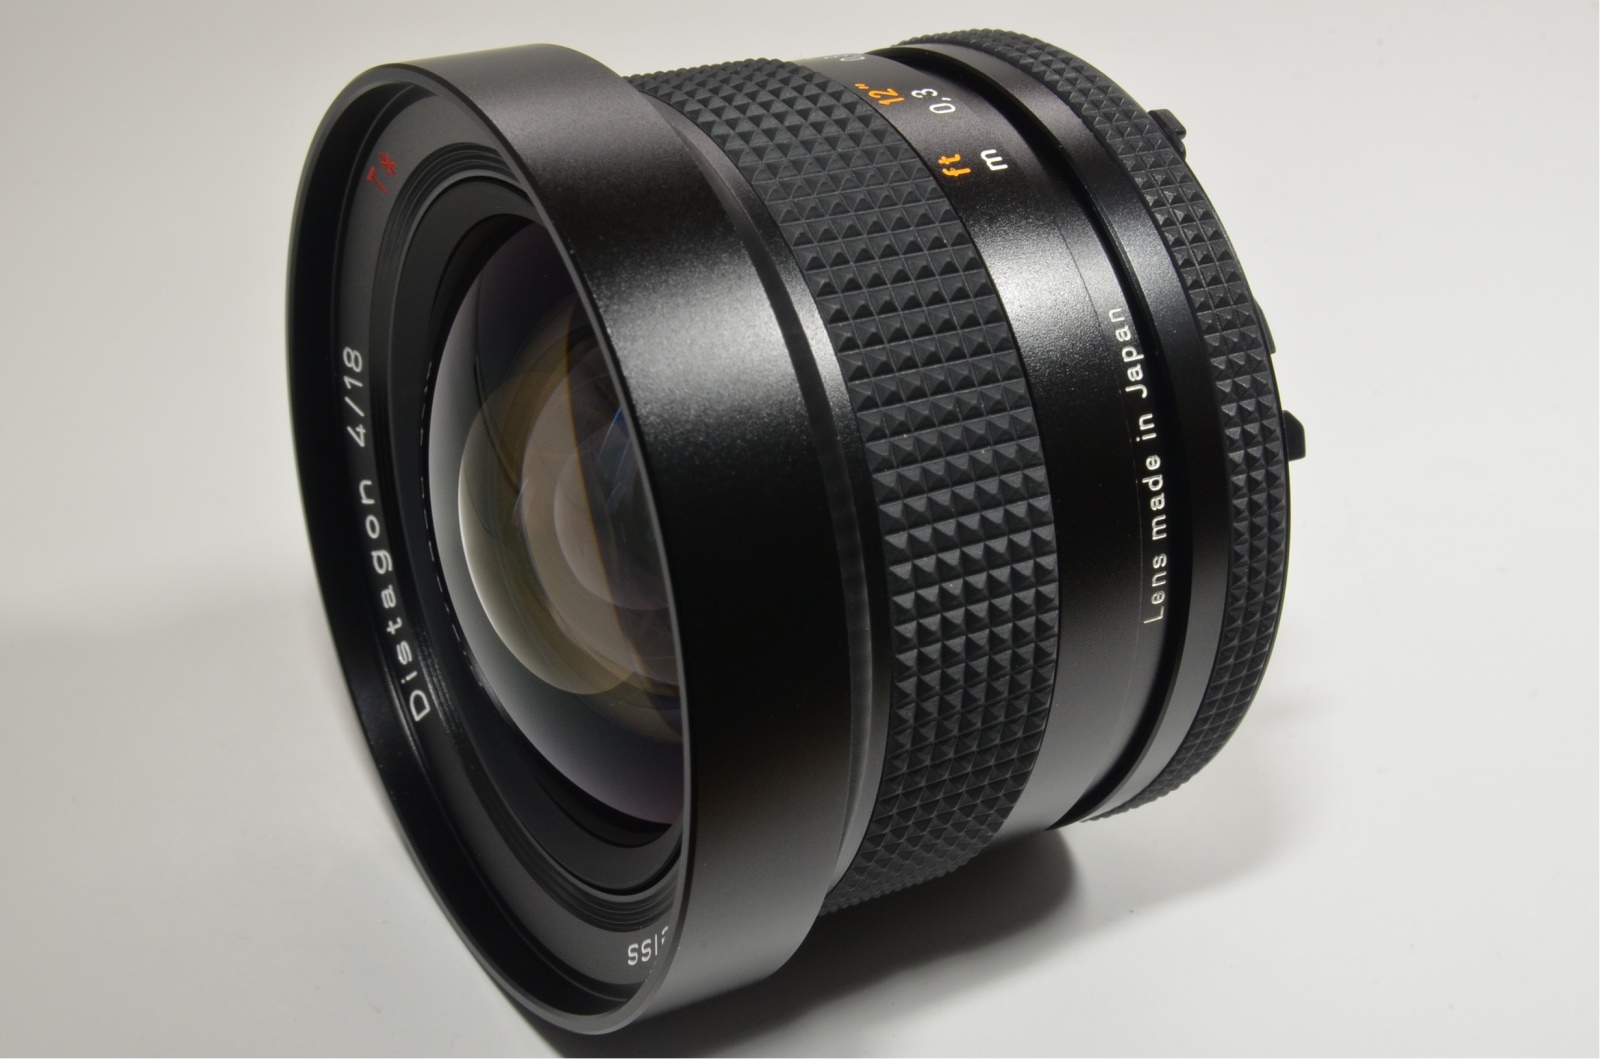 CONTAX Carl Zeiss Distagon T* 18mm f4 MMJ with 70/86 RING and 